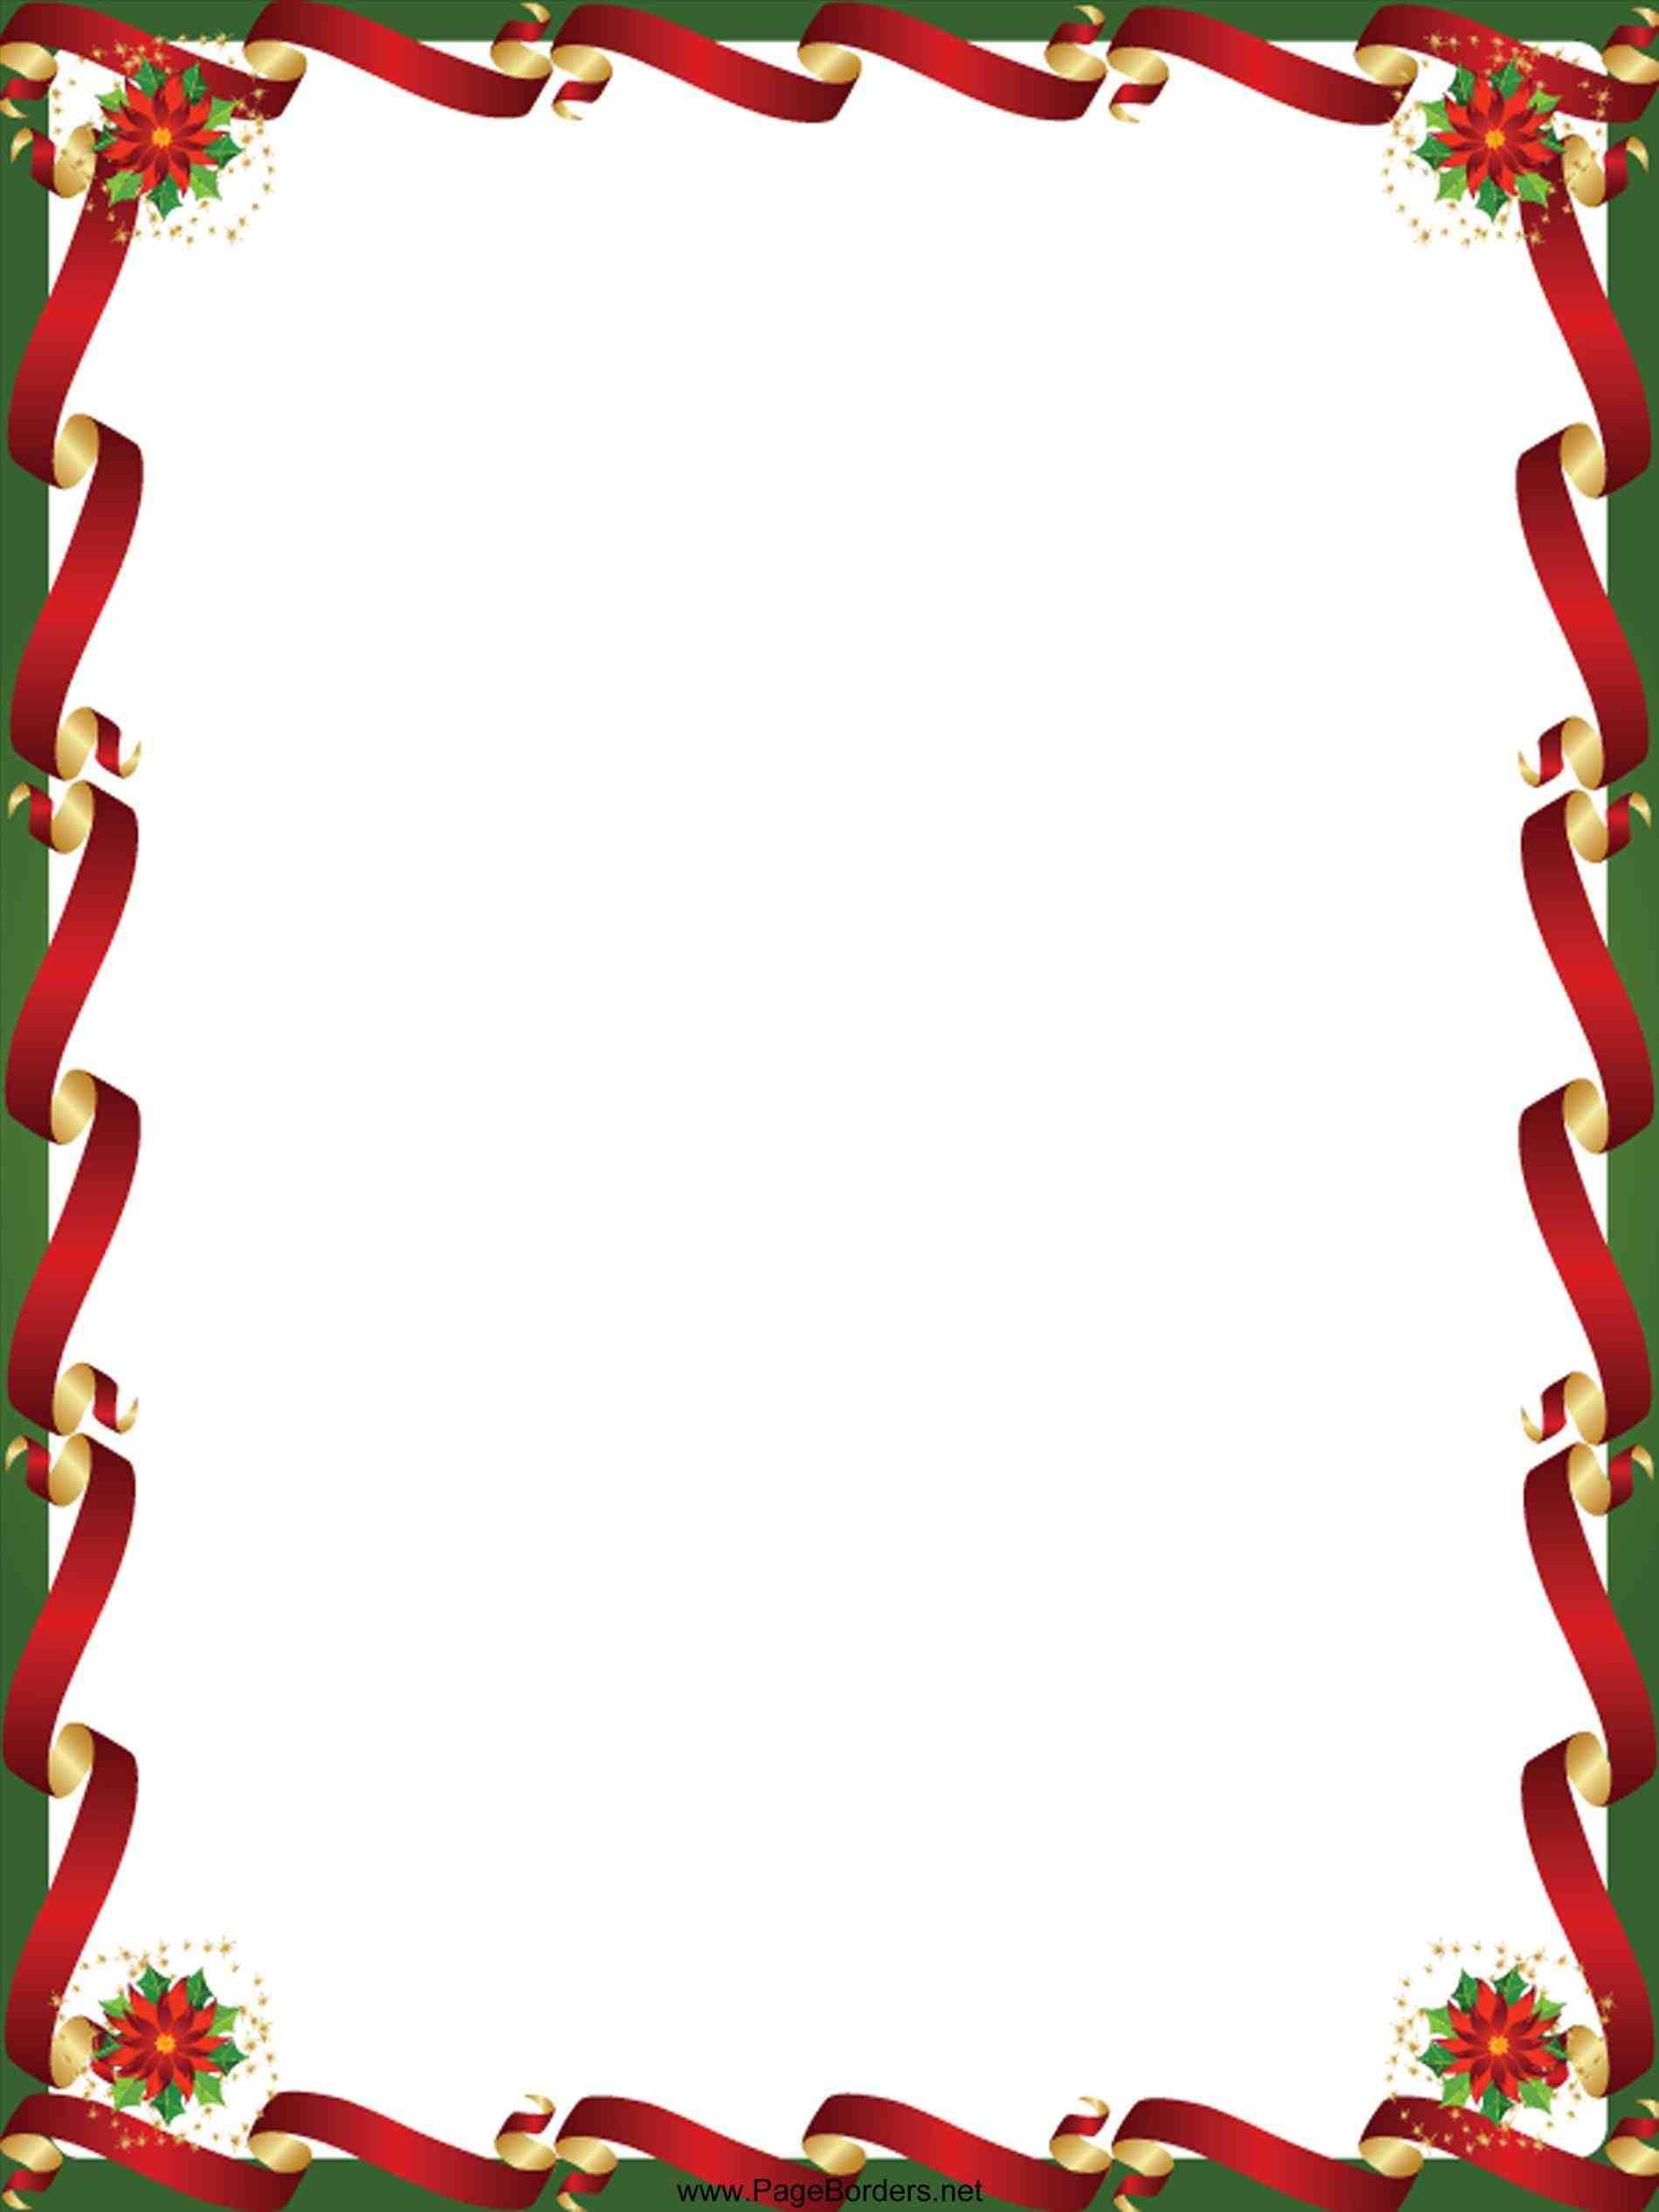 Border Clipart Downloadable Free Christmas Border Templates Inside Christmas Border Word Template